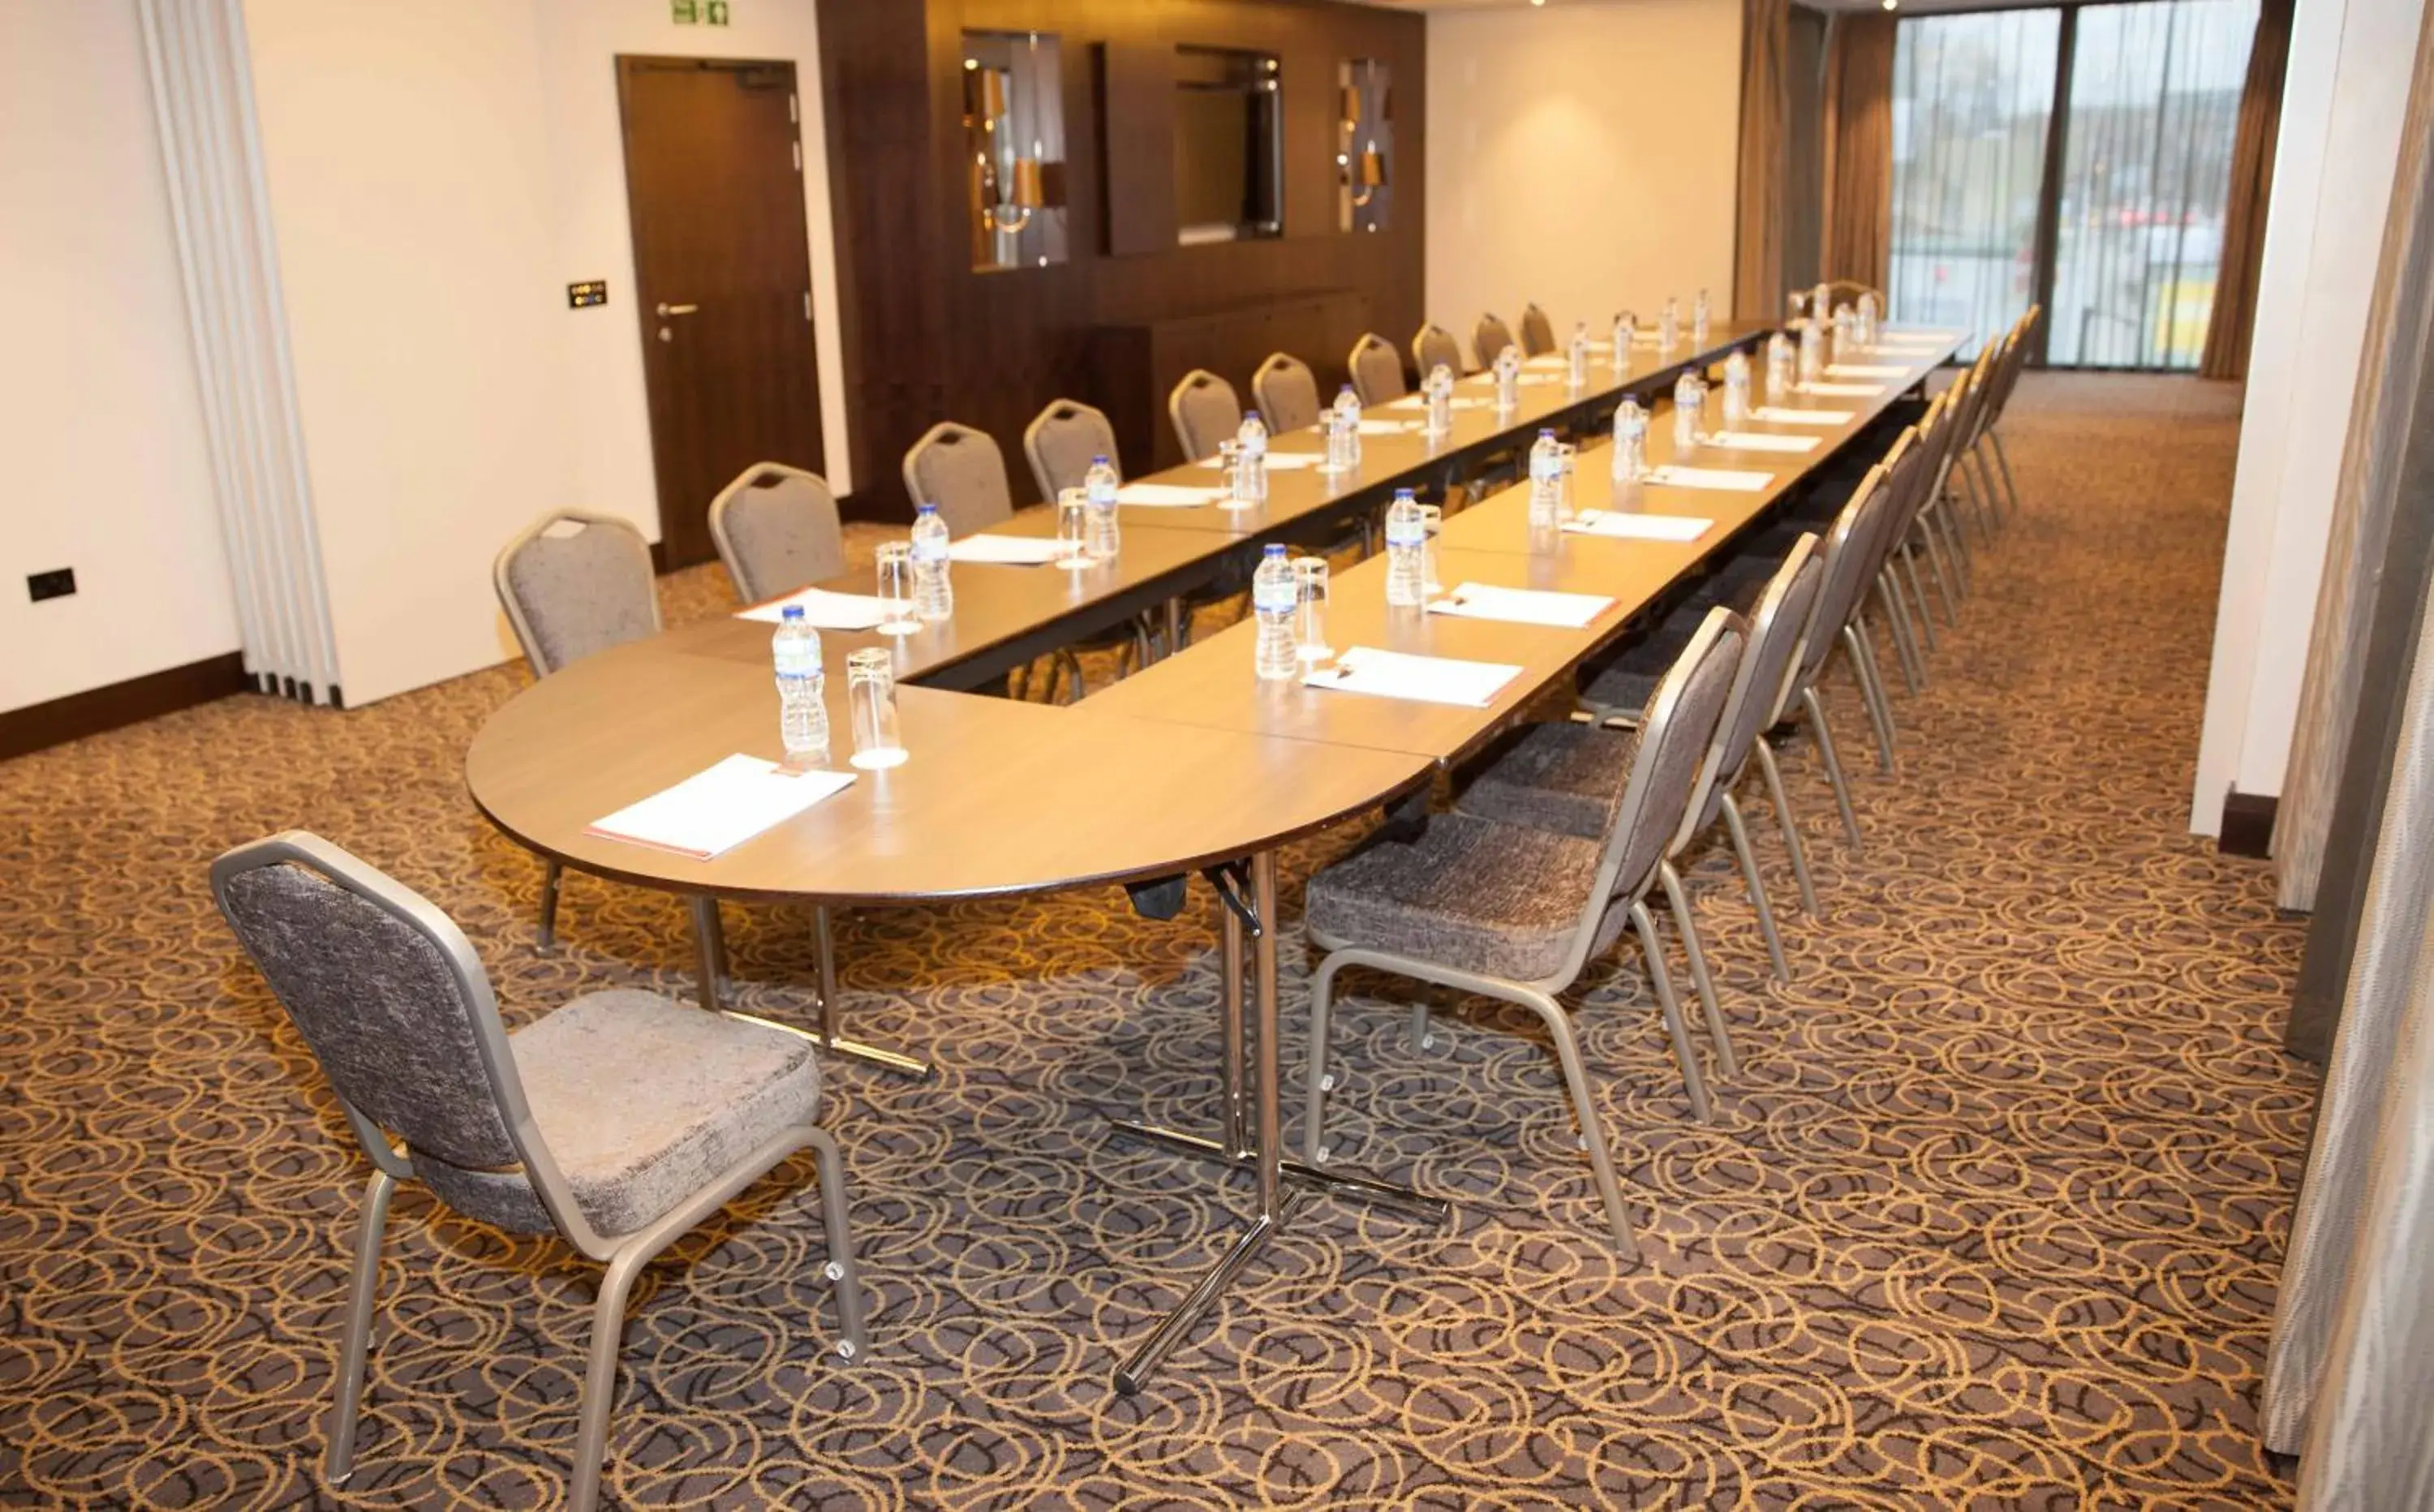 Meeting/conference room in St George's Hotel - Wembley